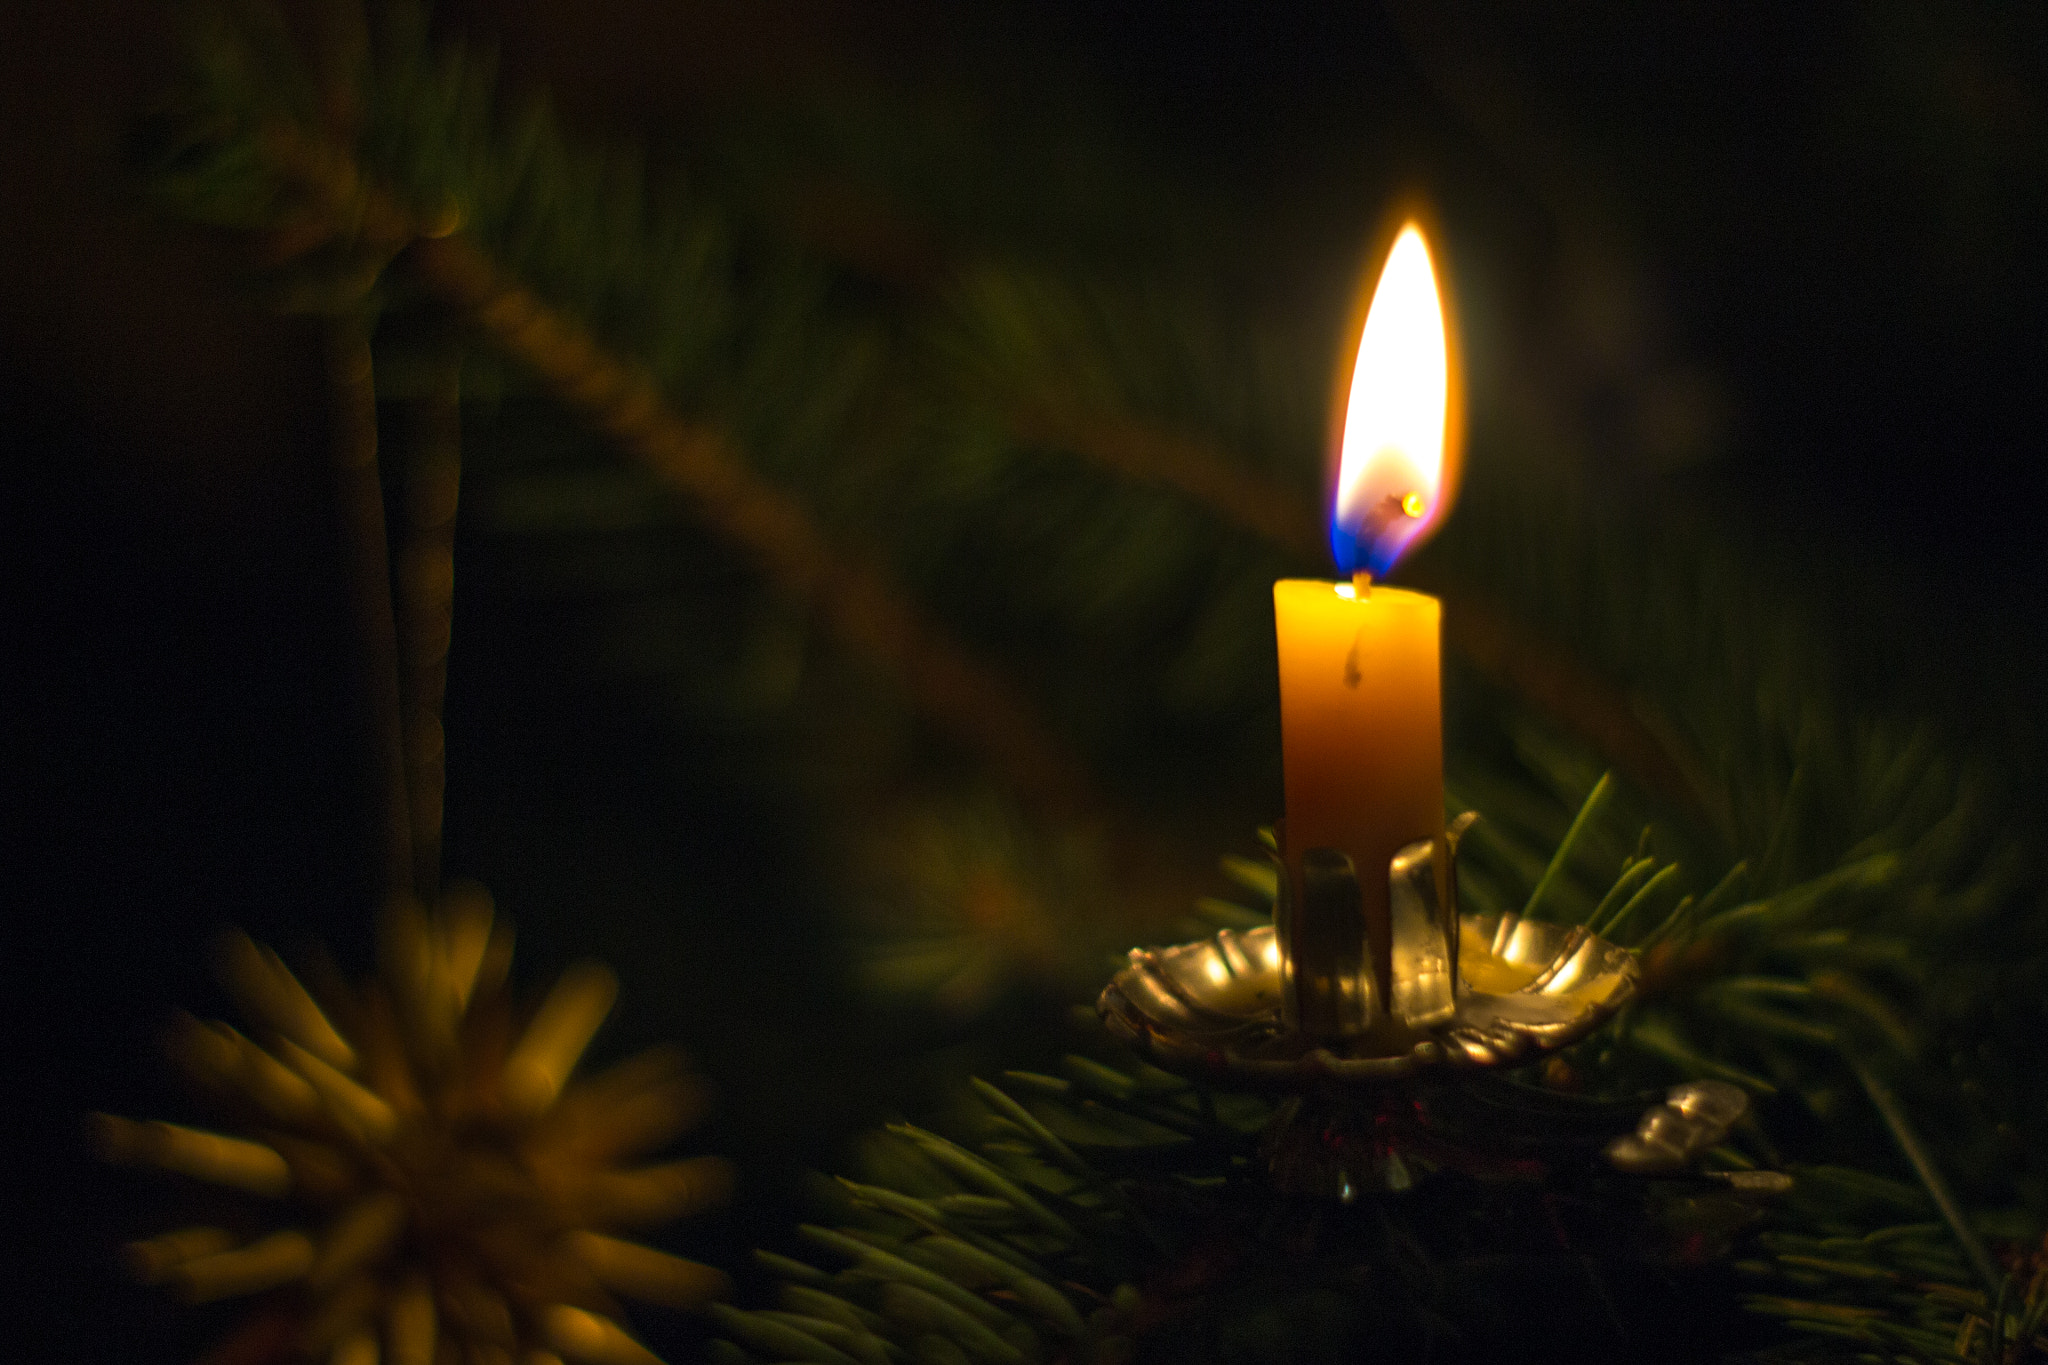 Nikon D3100 + AF-S DX VR Zoom-Nikkor 18-55mm f/3.5-5.6G + 2.8x sample photo. Candle photography